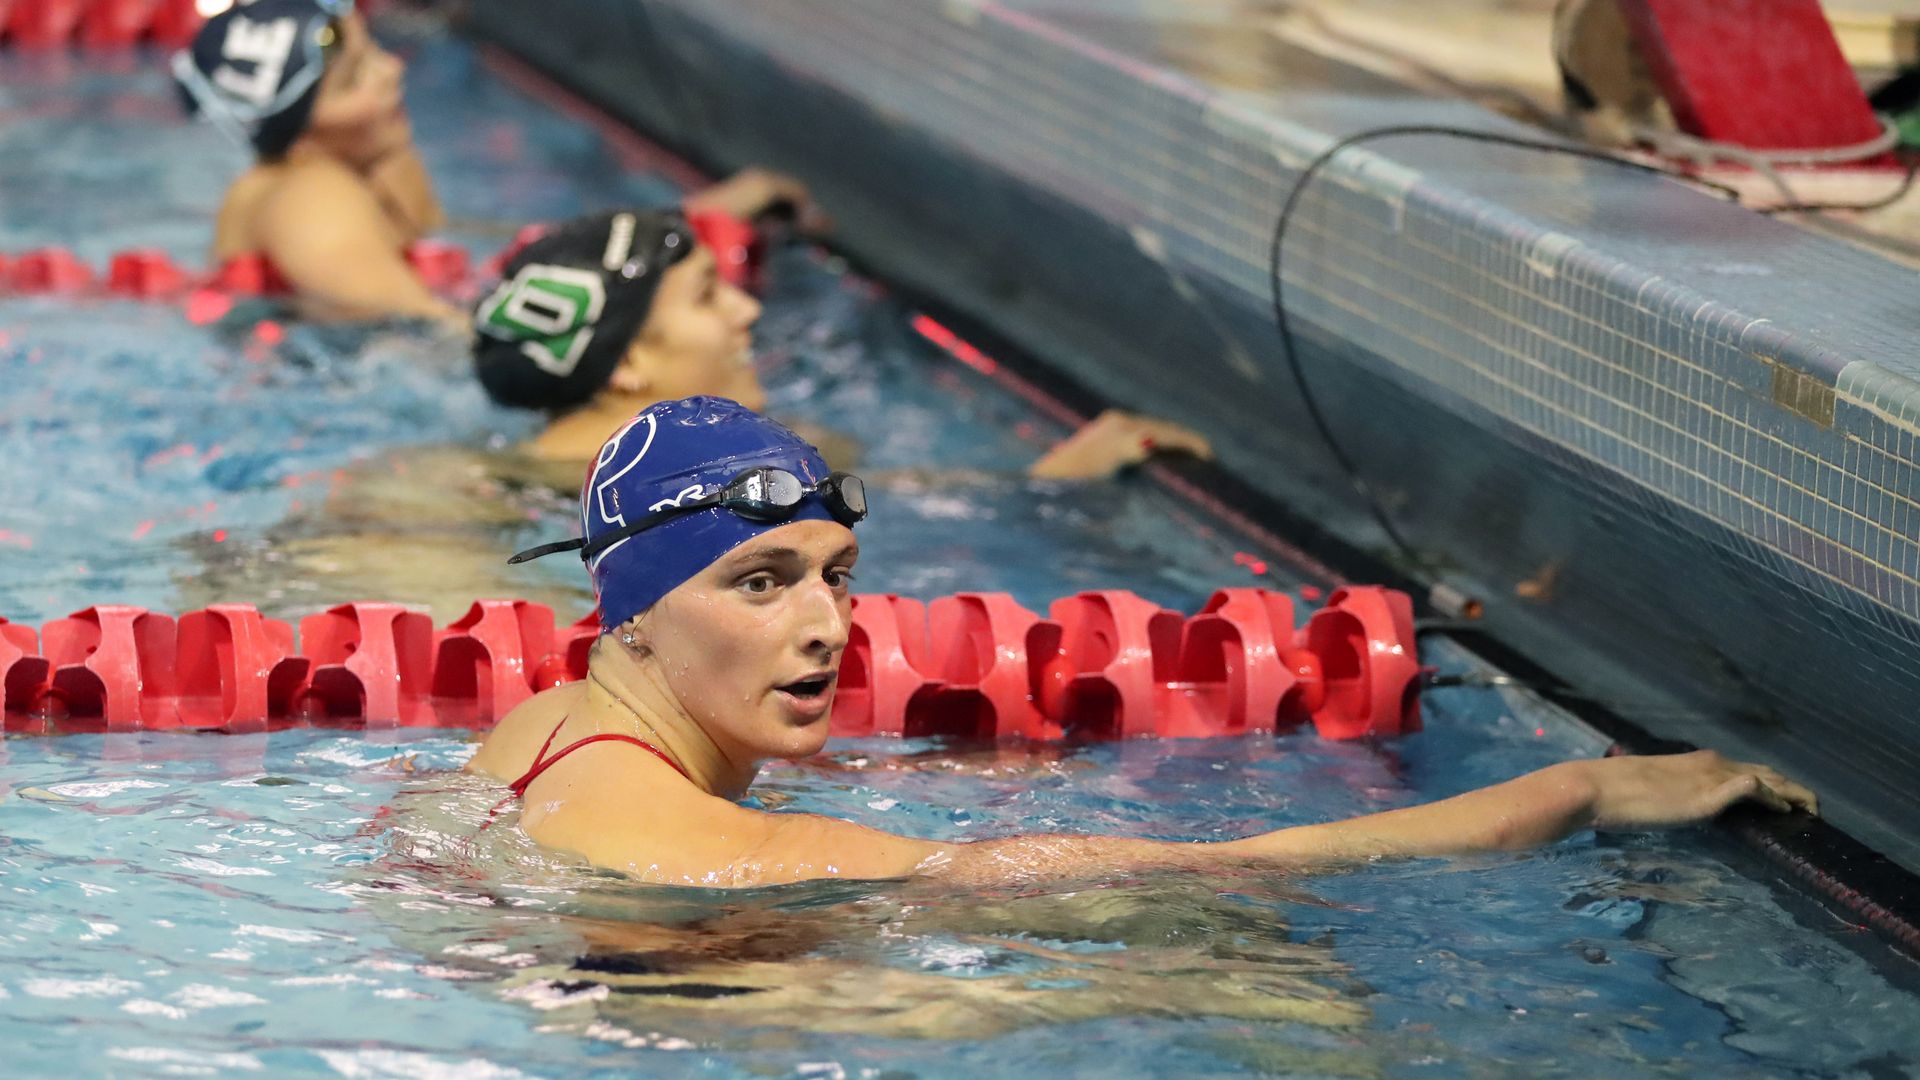 Photo of Lia Thomas in a swimming pool lane with competitors in the lanes next to her